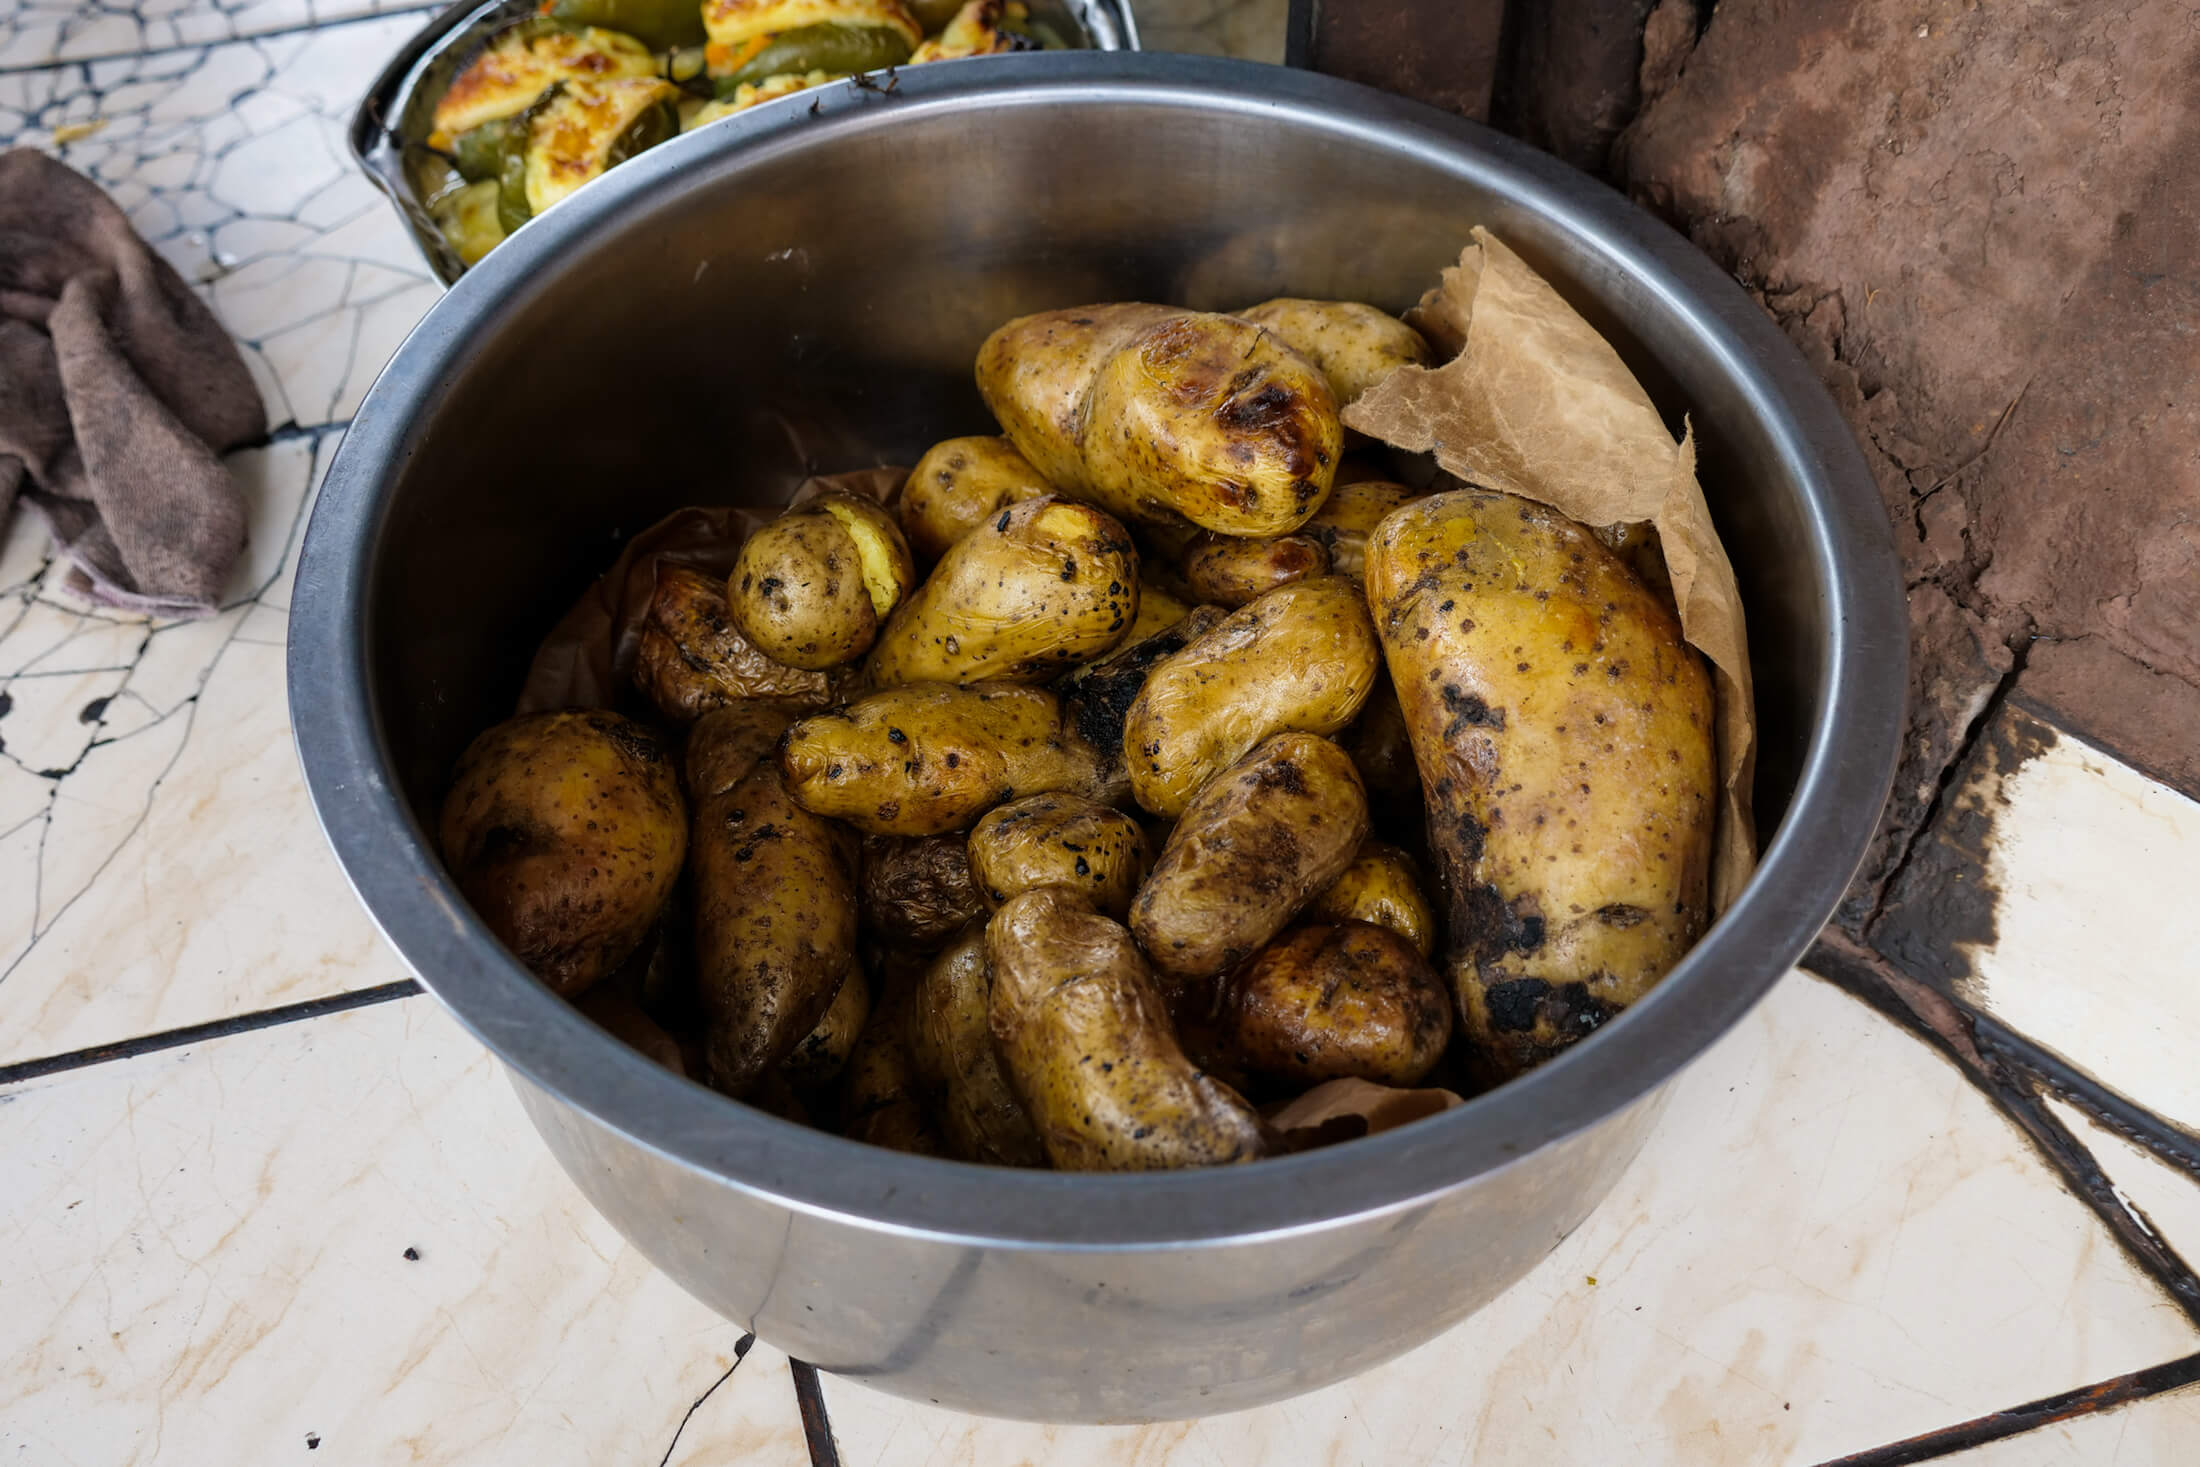 Peruvian golden potatoes are so full of smoky flavor